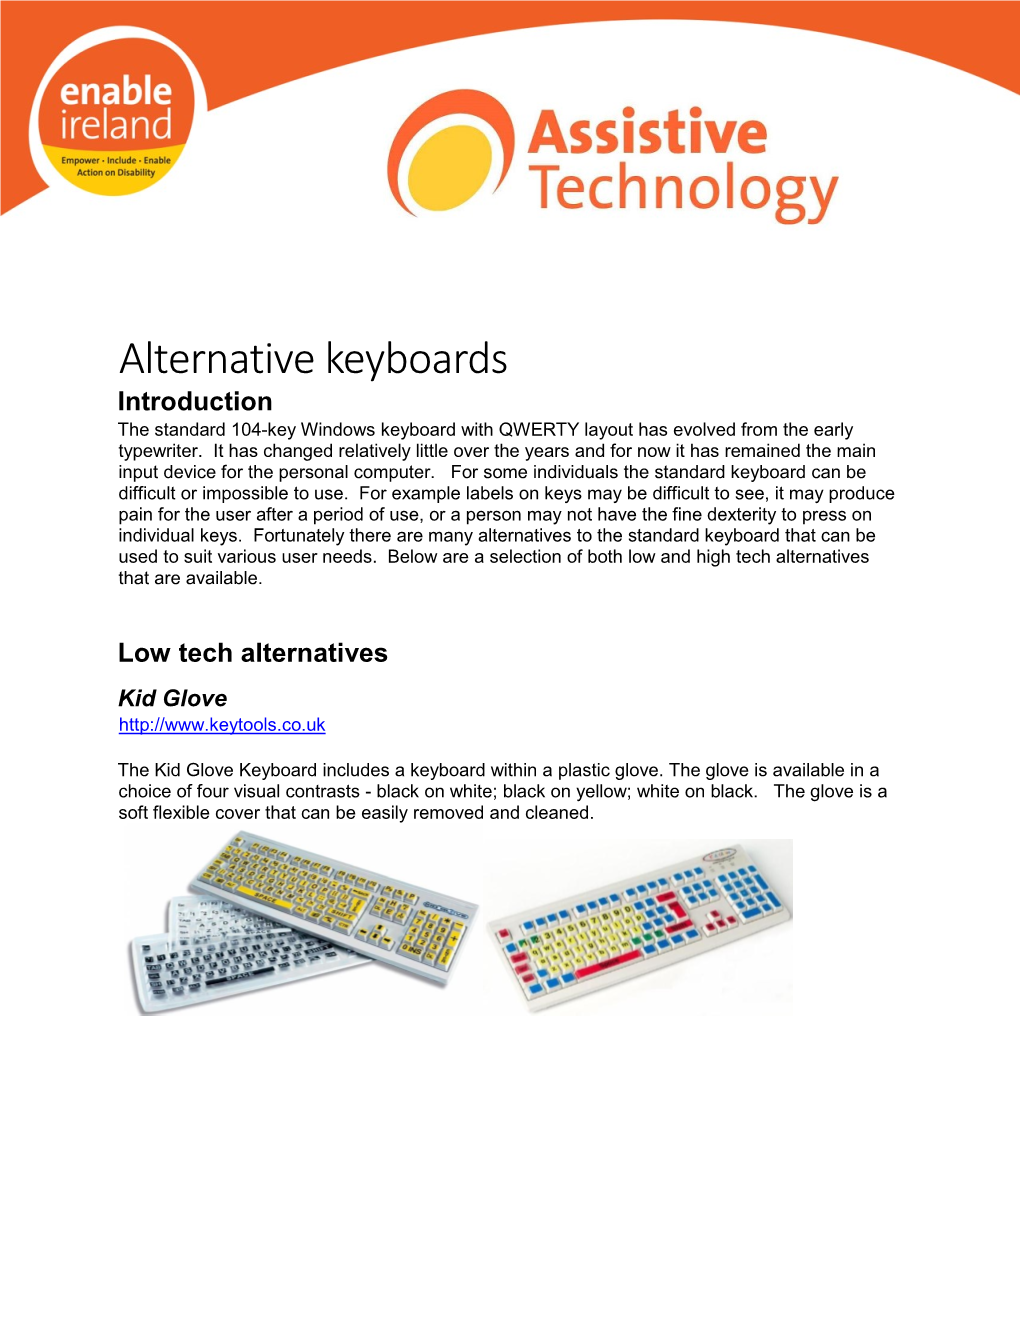 Alternative Keyboards Introduction the Standard 104-Key Windows Keyboard with QWERTY Layout Has Evolved from the Early Typewriter